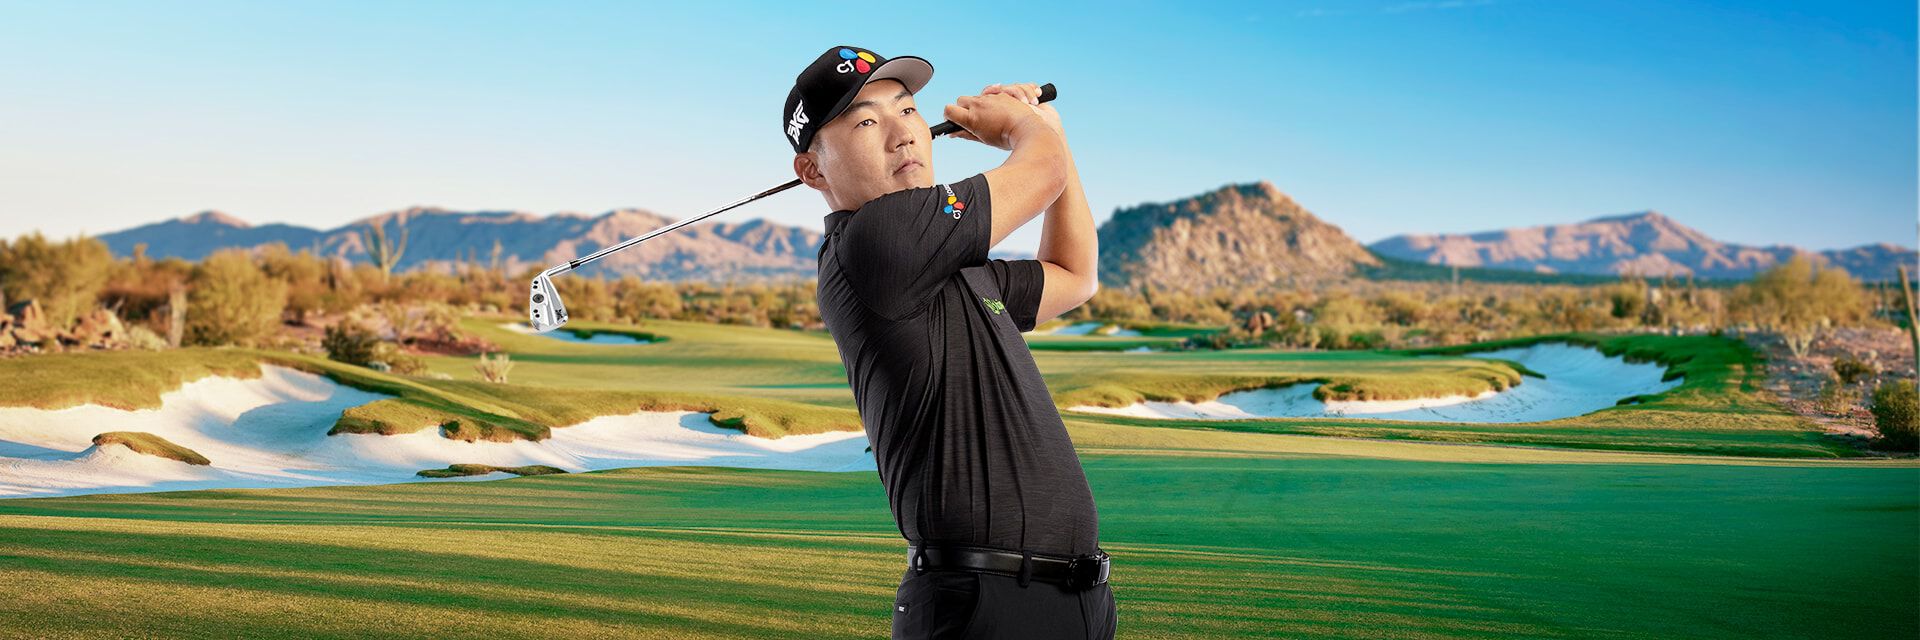 PGA TOUR PRO Sung Kang on the course swinging and iron.